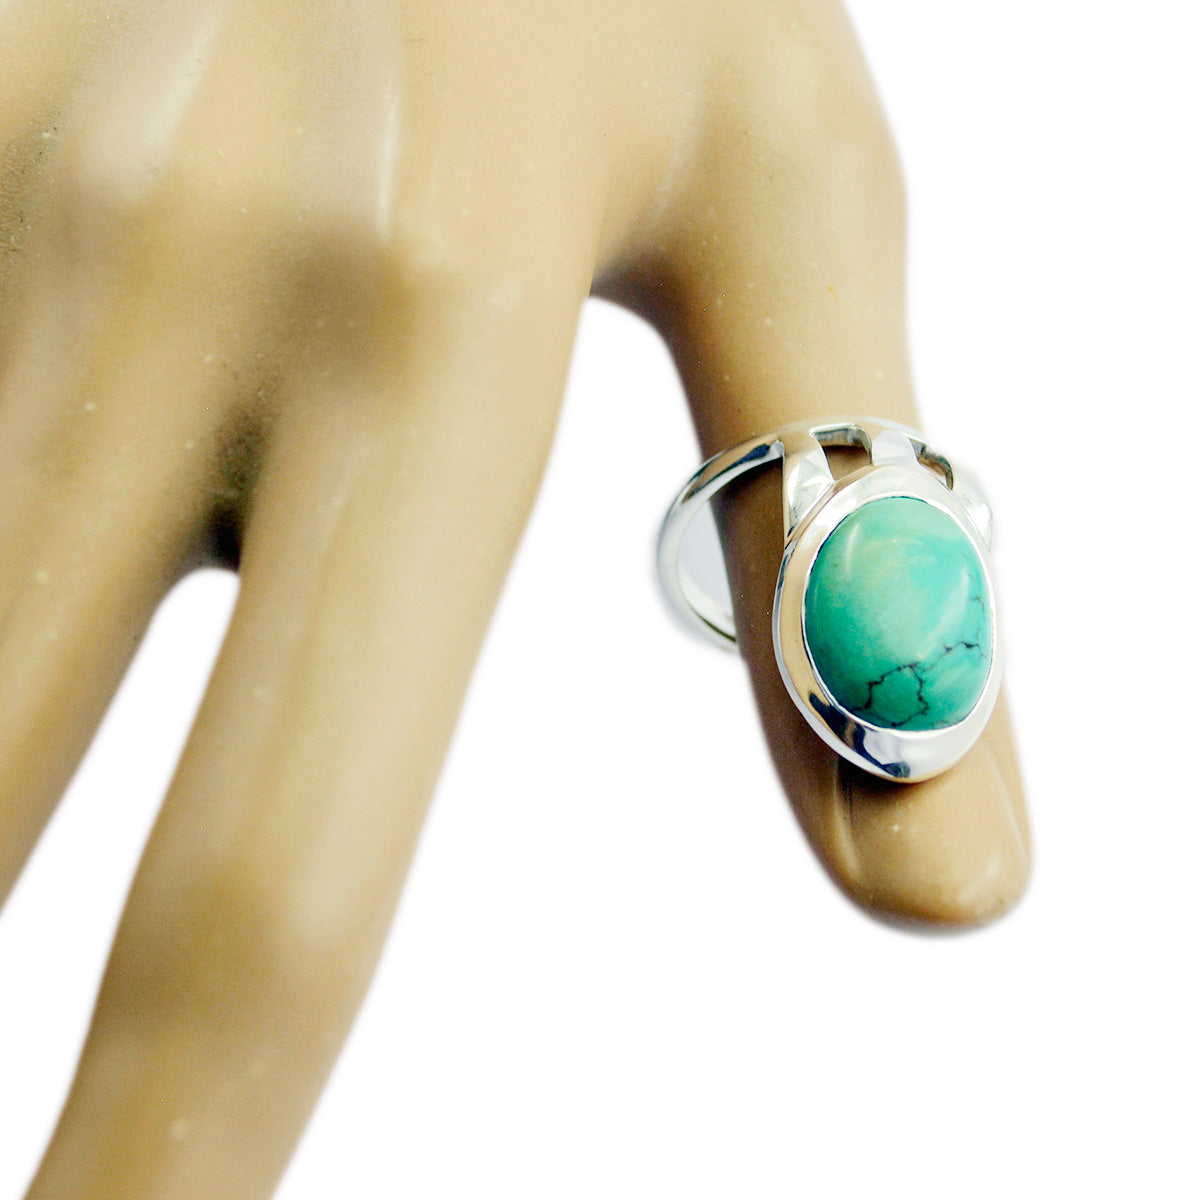 Riyo Wholesales Gems Turquoise Solid Silver Ring Pagan Jewelry